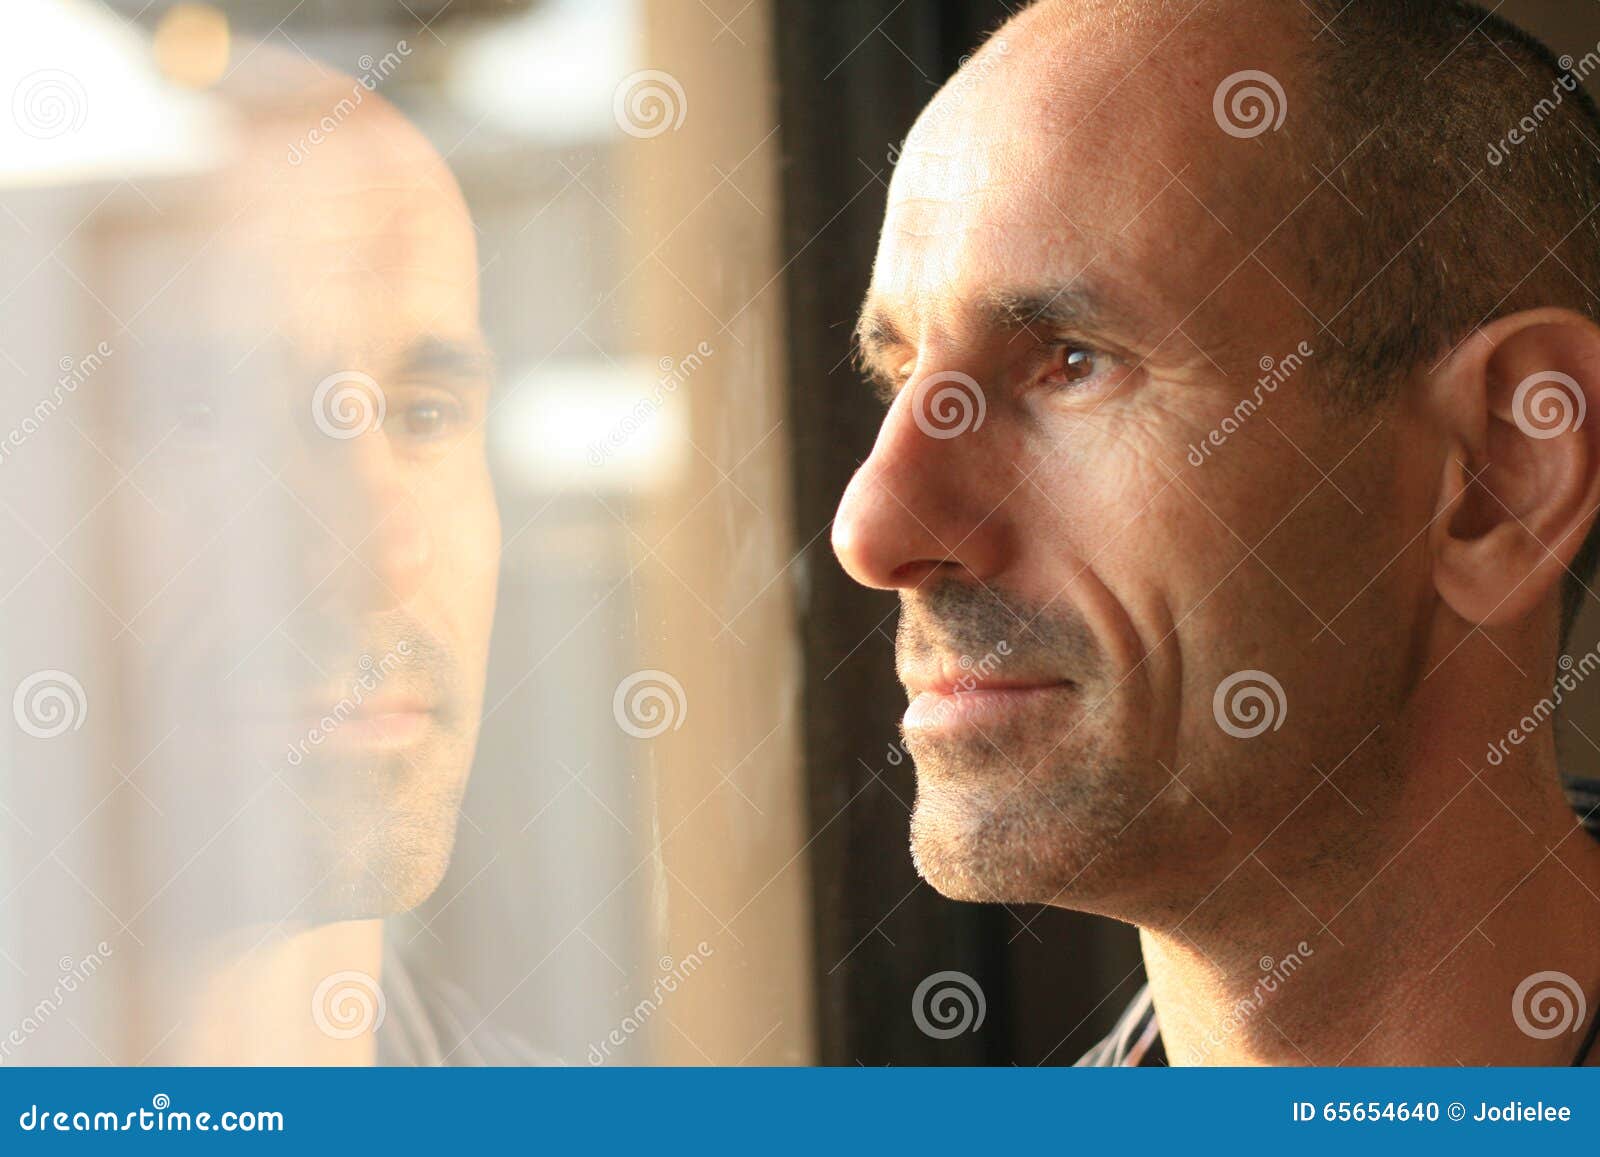 man in thought with window reflection